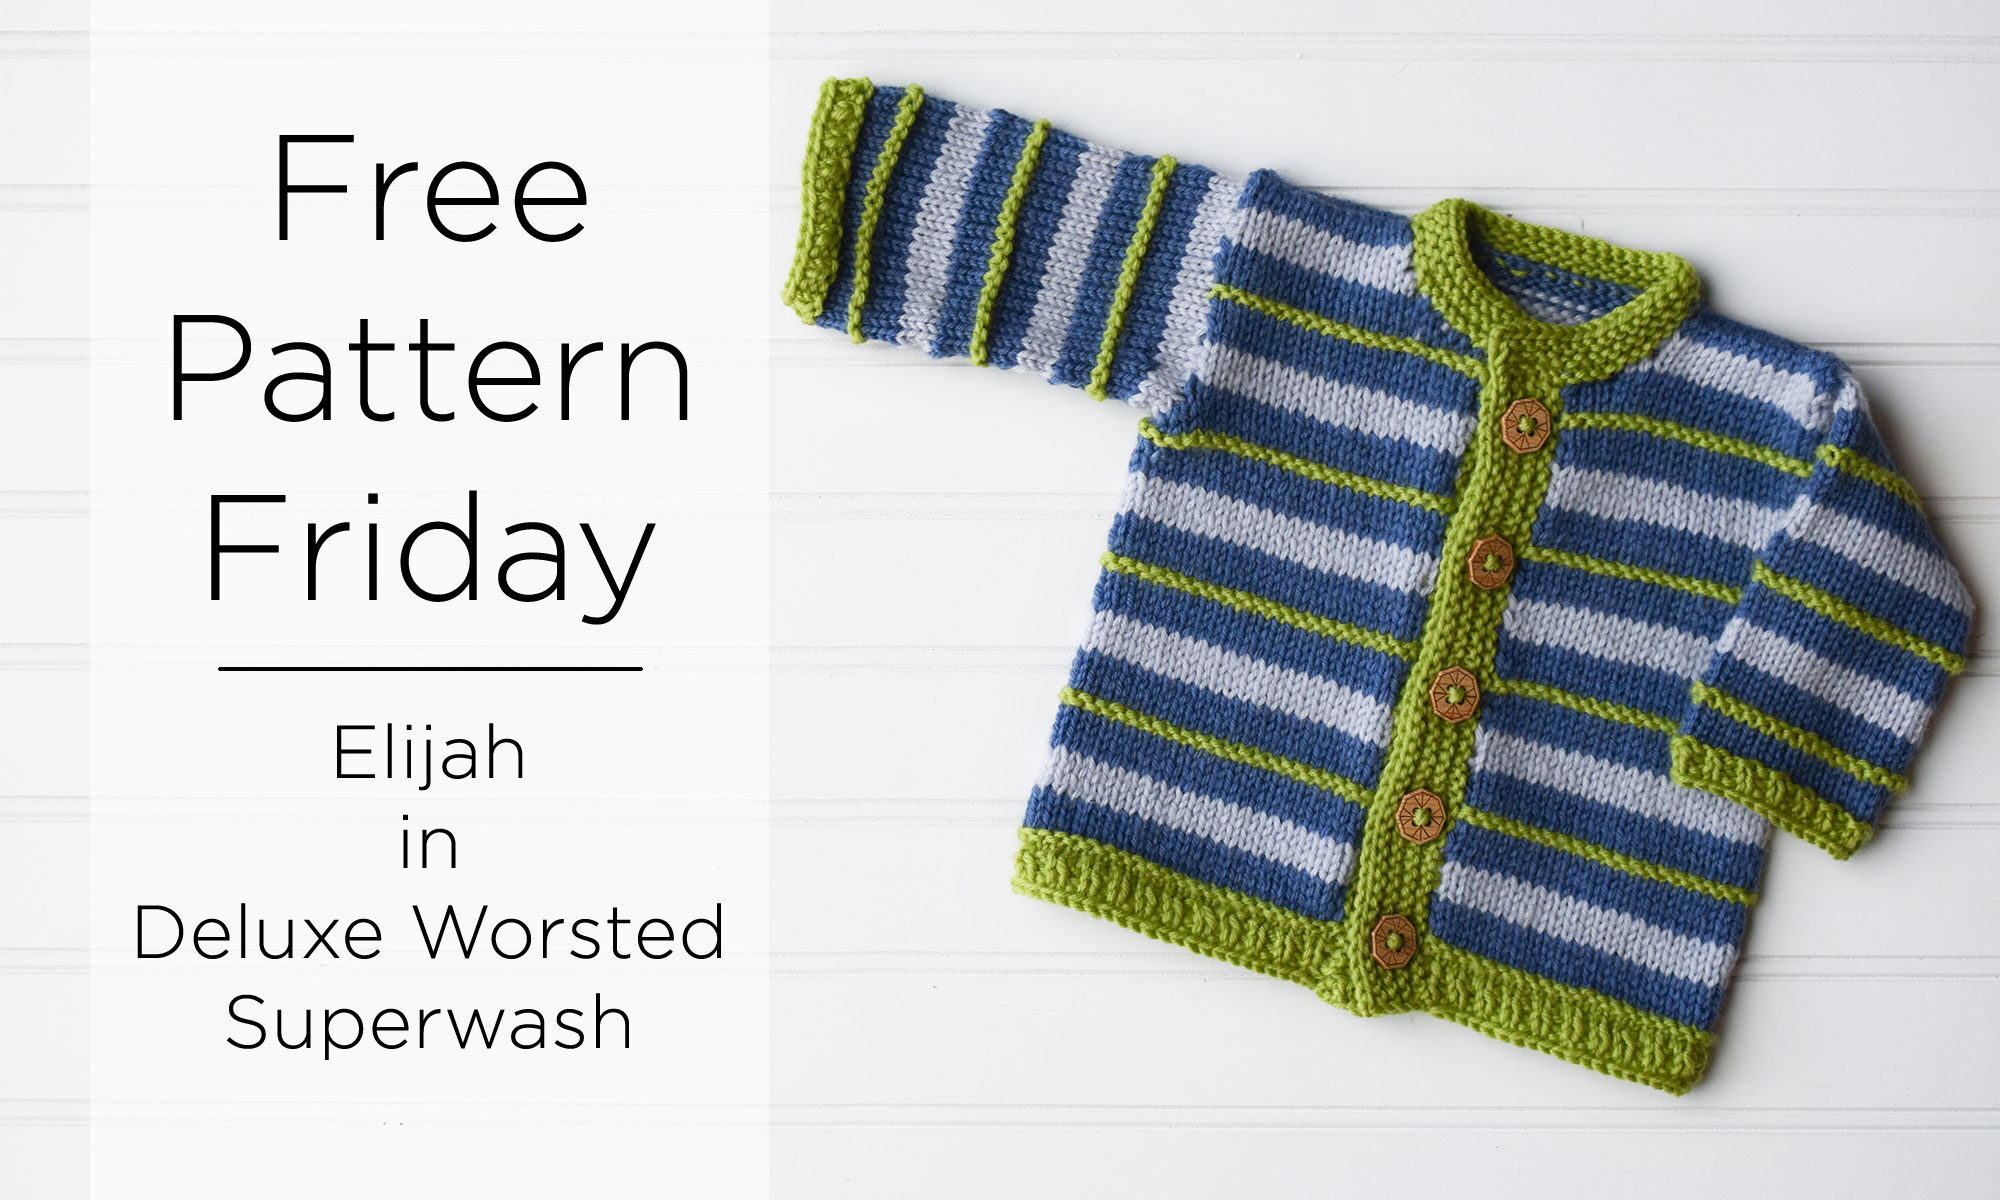 A childrens sweater in blue and green colors is laying flat with one arm outstretched for display next to a caption that says "Free Pattern Friday. Elijah in Deluxe Worsted Superwash"